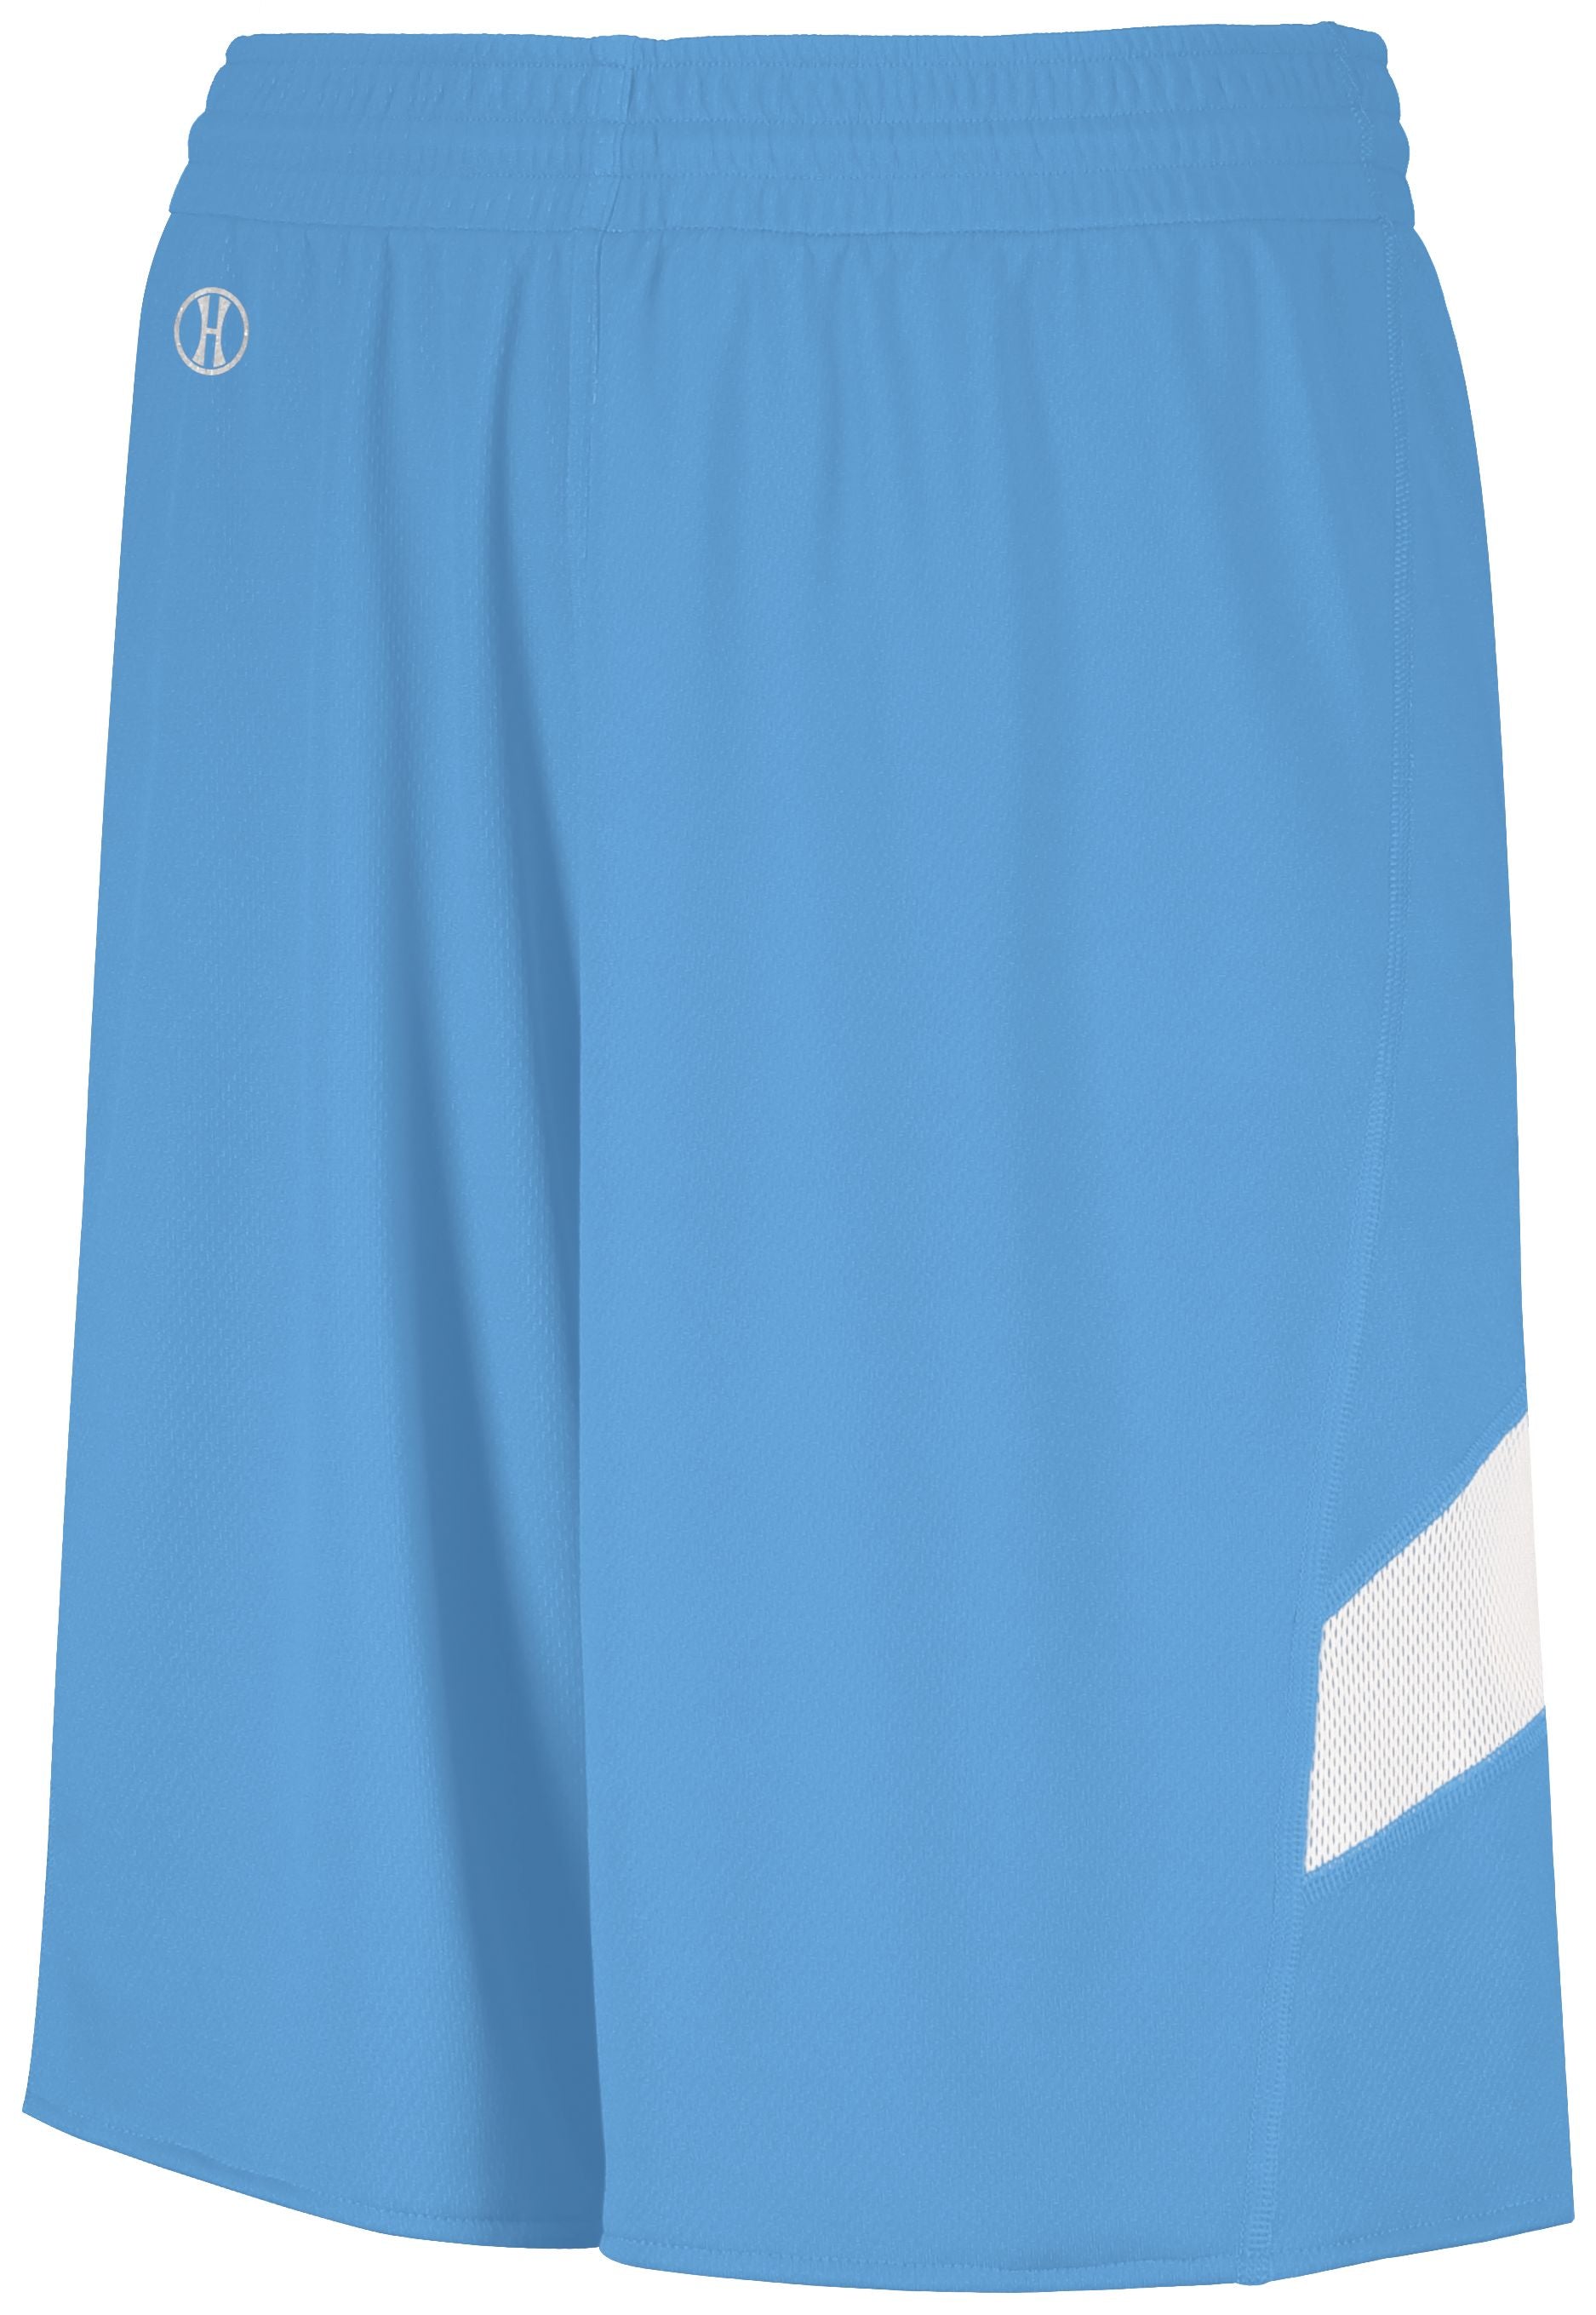 Youth Dual-Side Single Ply Basketball Shorts 224279